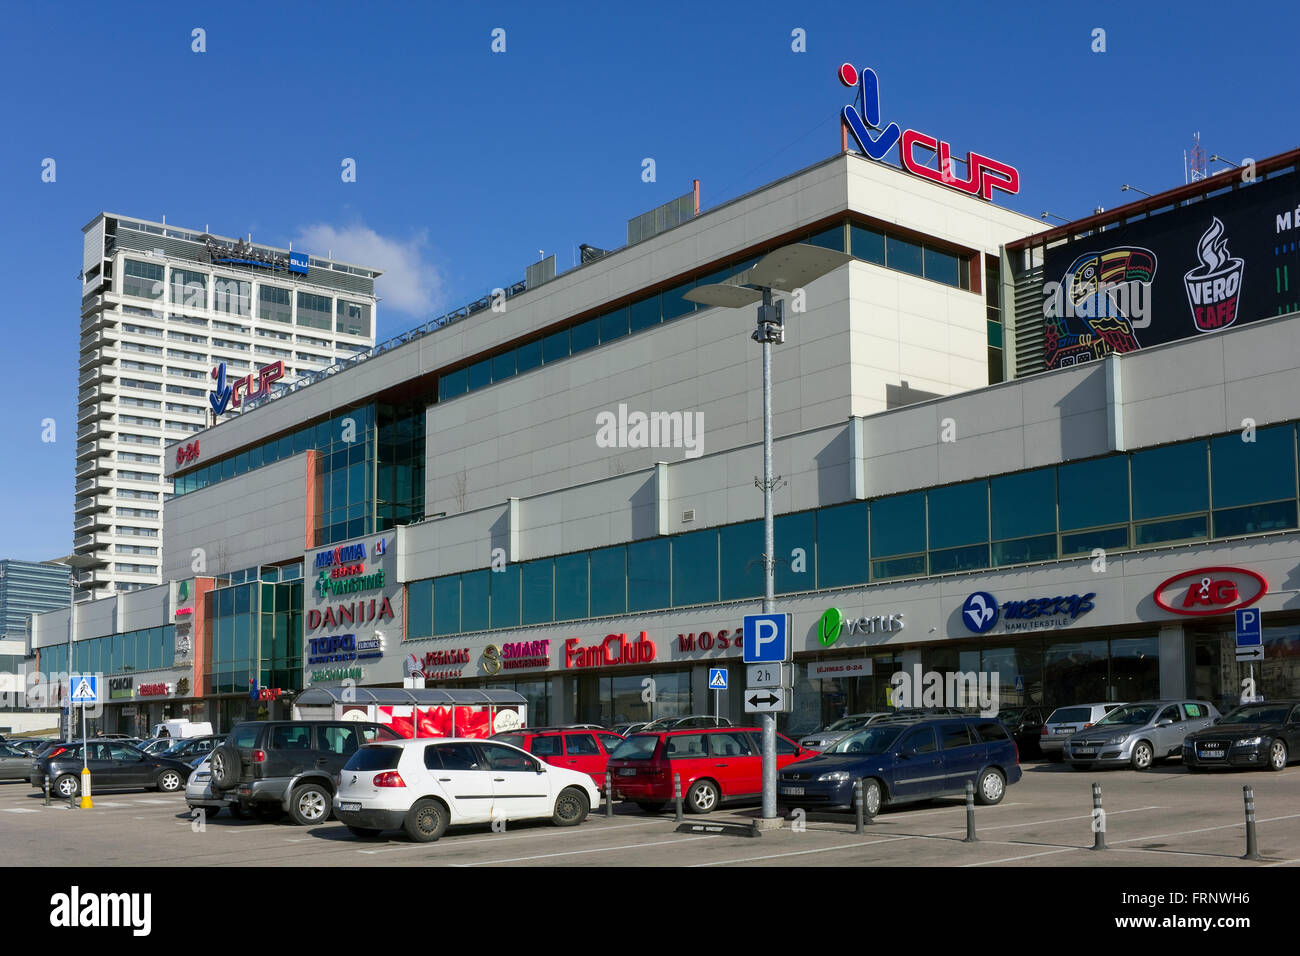 VILNIUS, LITHUANIA - MARCH 13, 2016: The building of the central department store CUP and Radisson hotel against the blue March Stock Photo